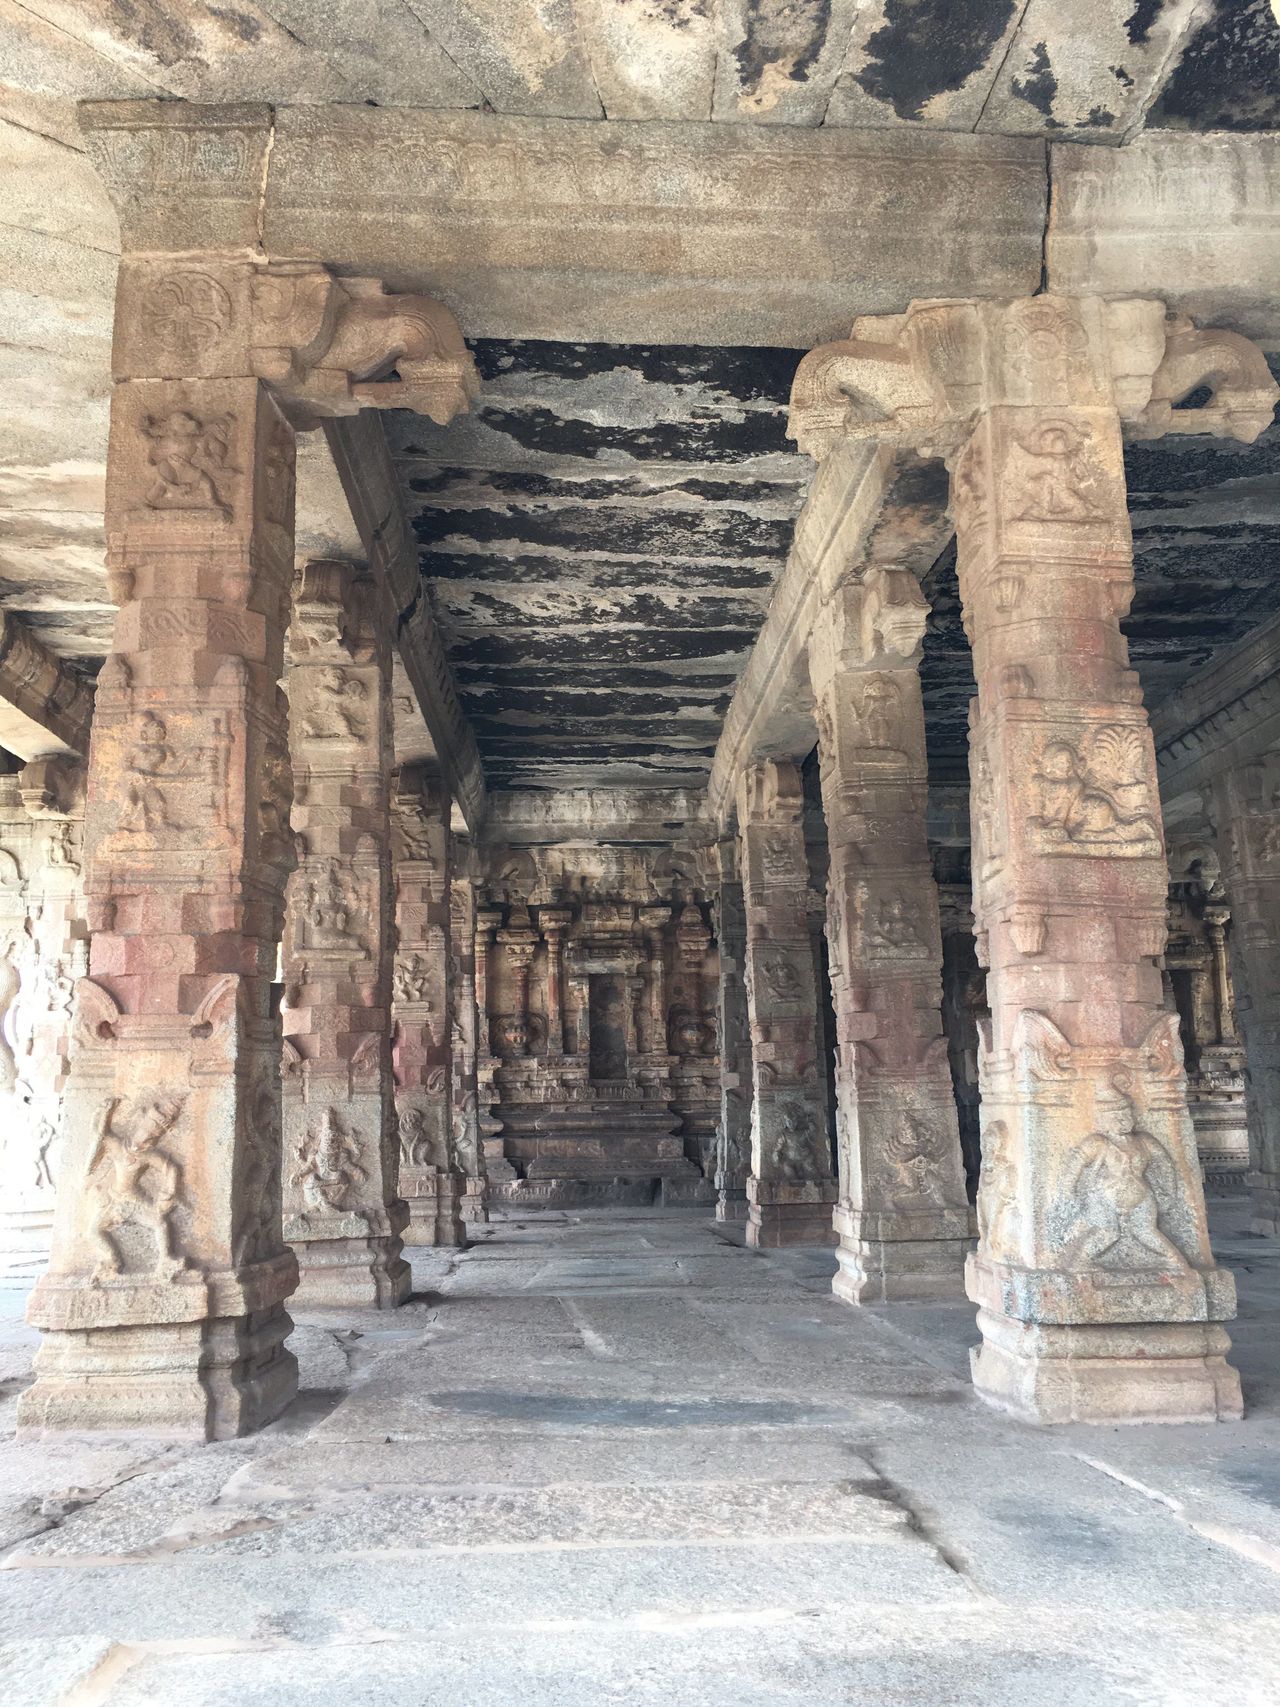 The outer verandah of one of the temple  